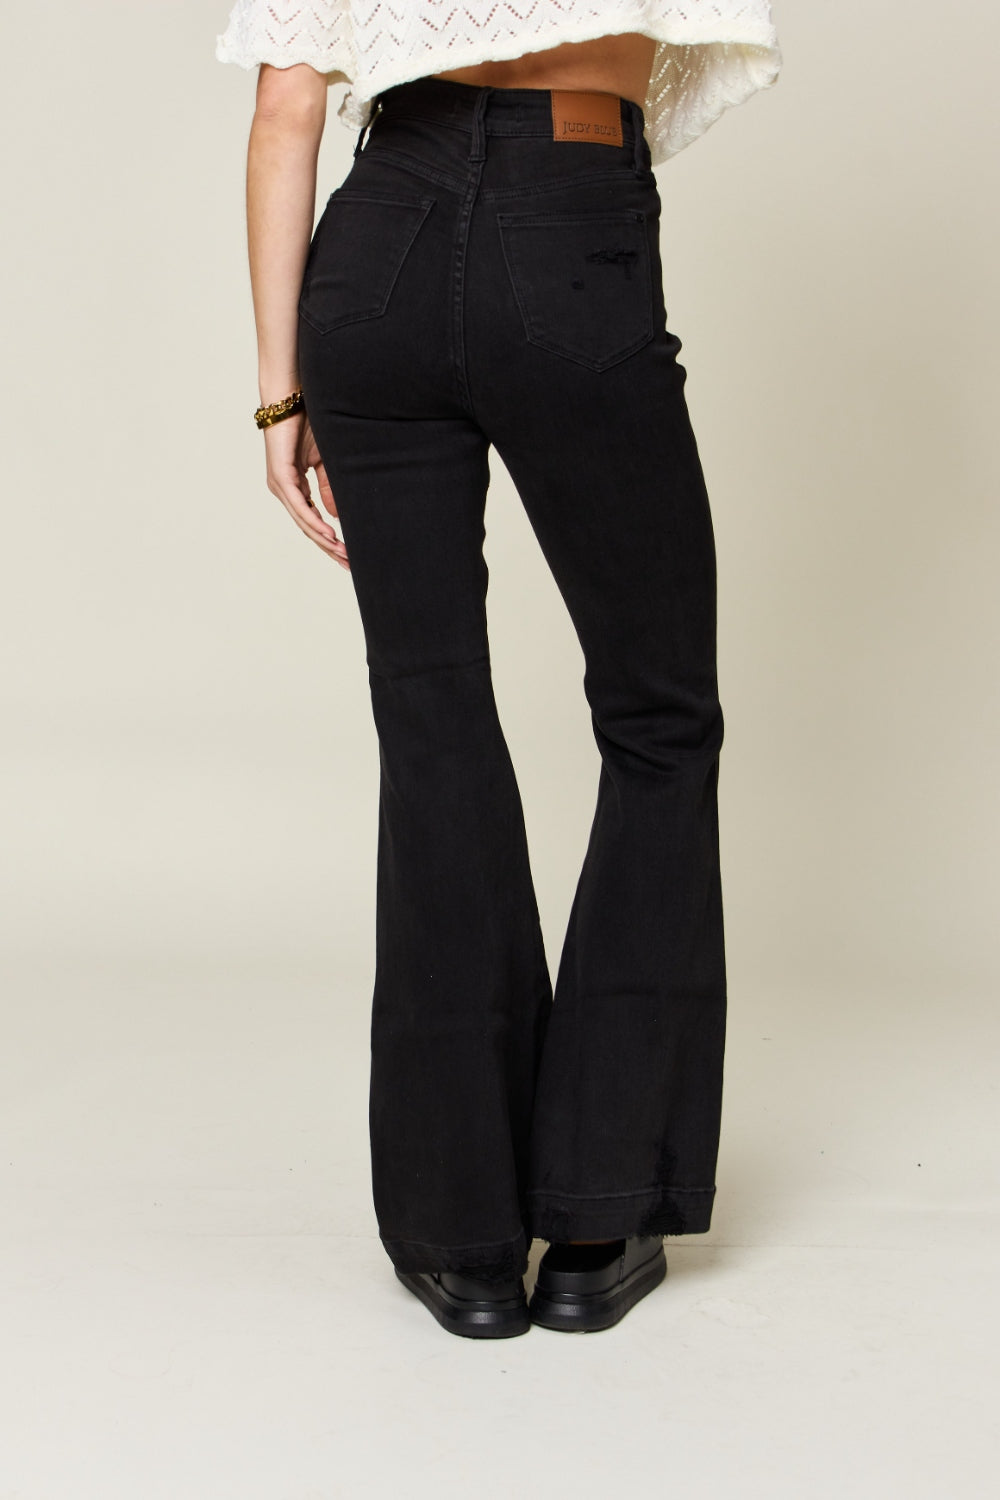 Judy Blue High Waist Distressed Flare Jeans ONLINE EXCLUSIVE